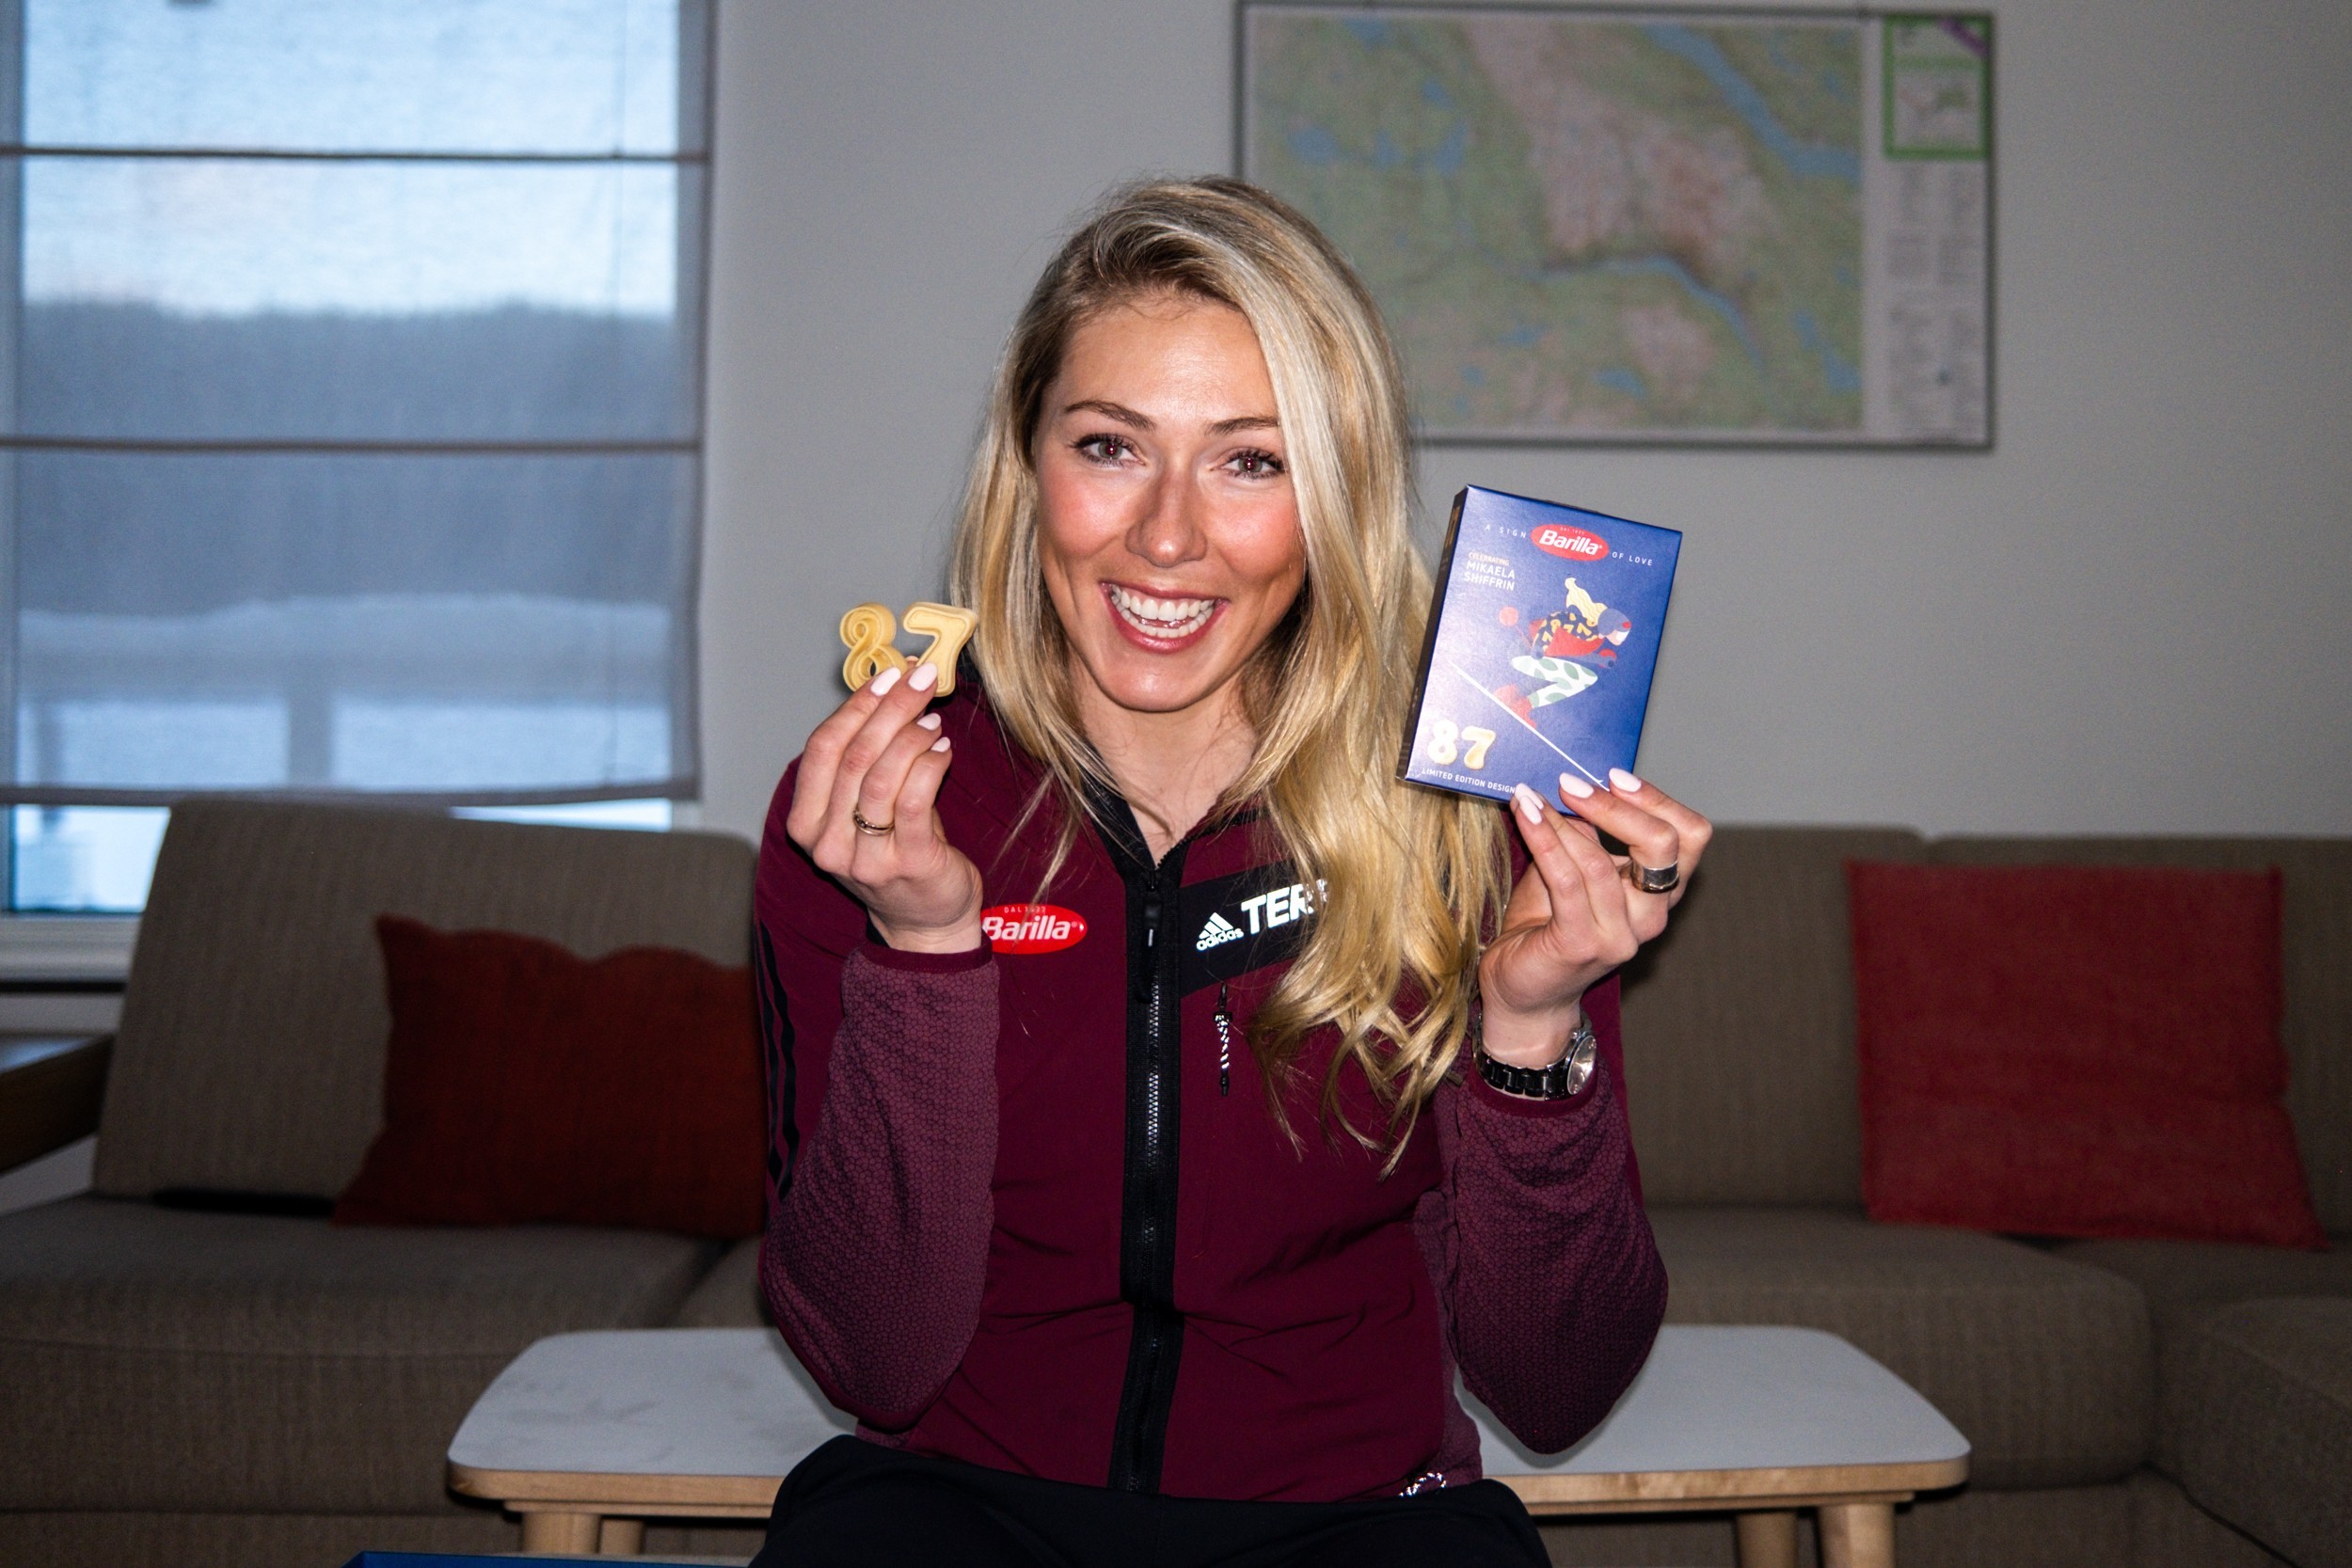 Barilla & Mikaela Shiffrin: Greatness starts with a great recipe - Pack No. 22 